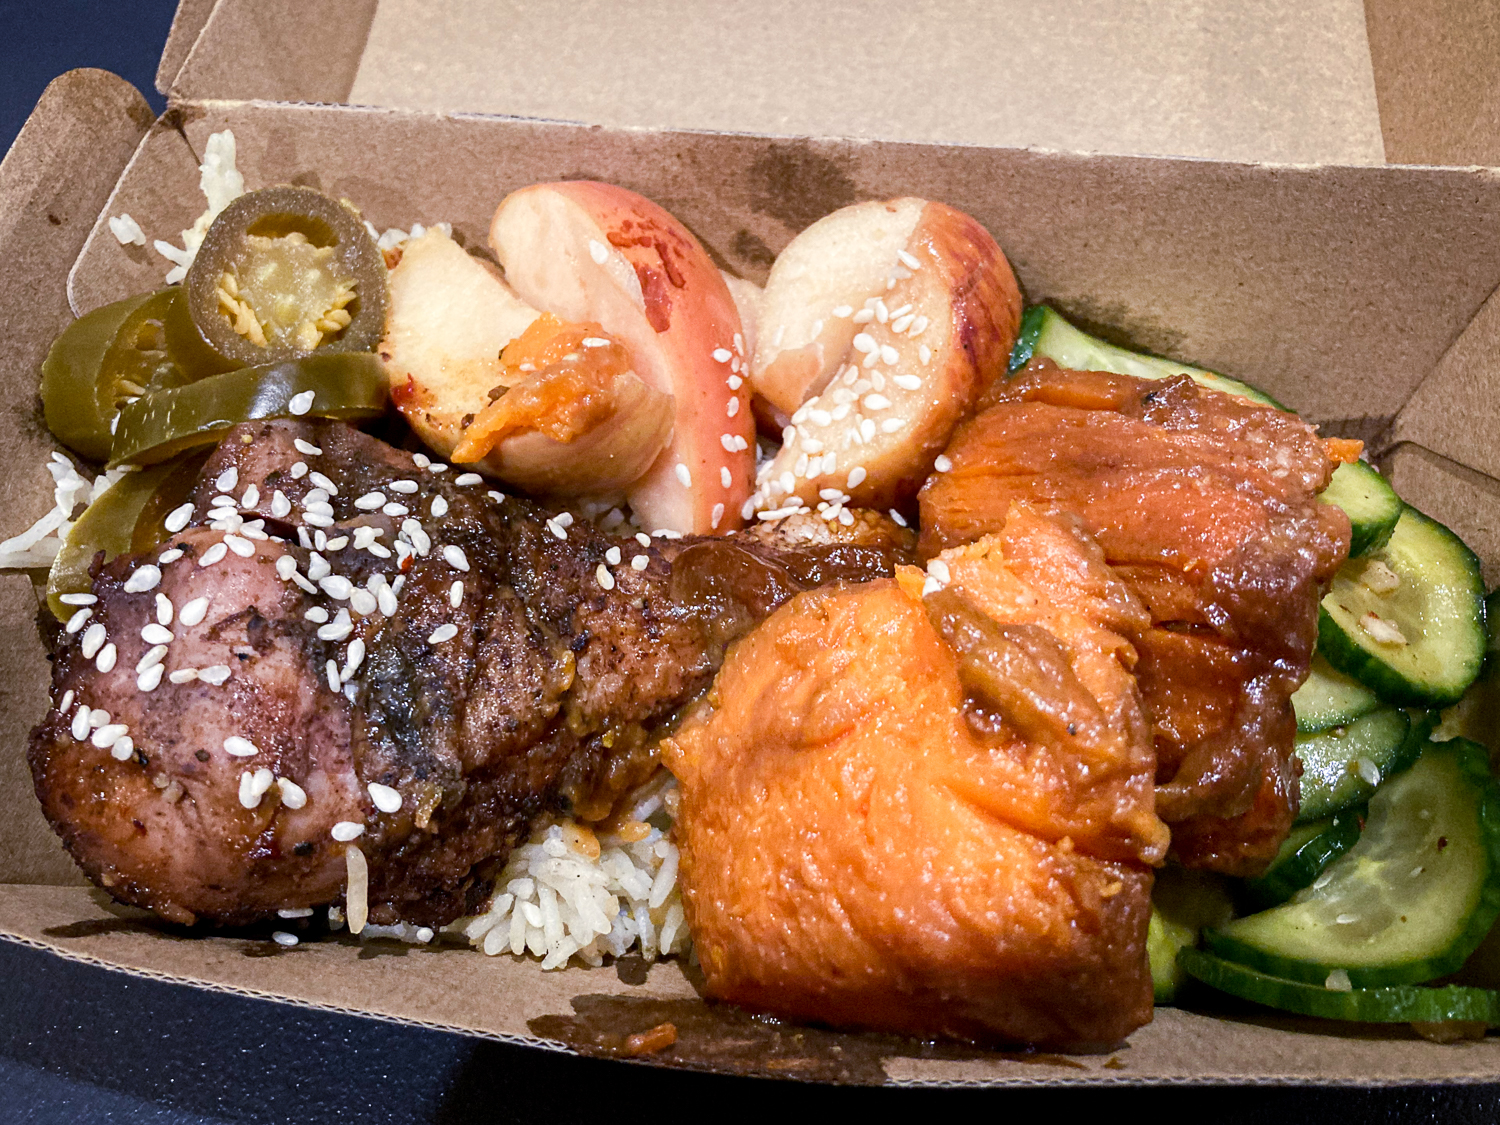 A food box containing spicy fried chicken, sweet potatoes, cooked apples, jalapenos, and cucumber side salad